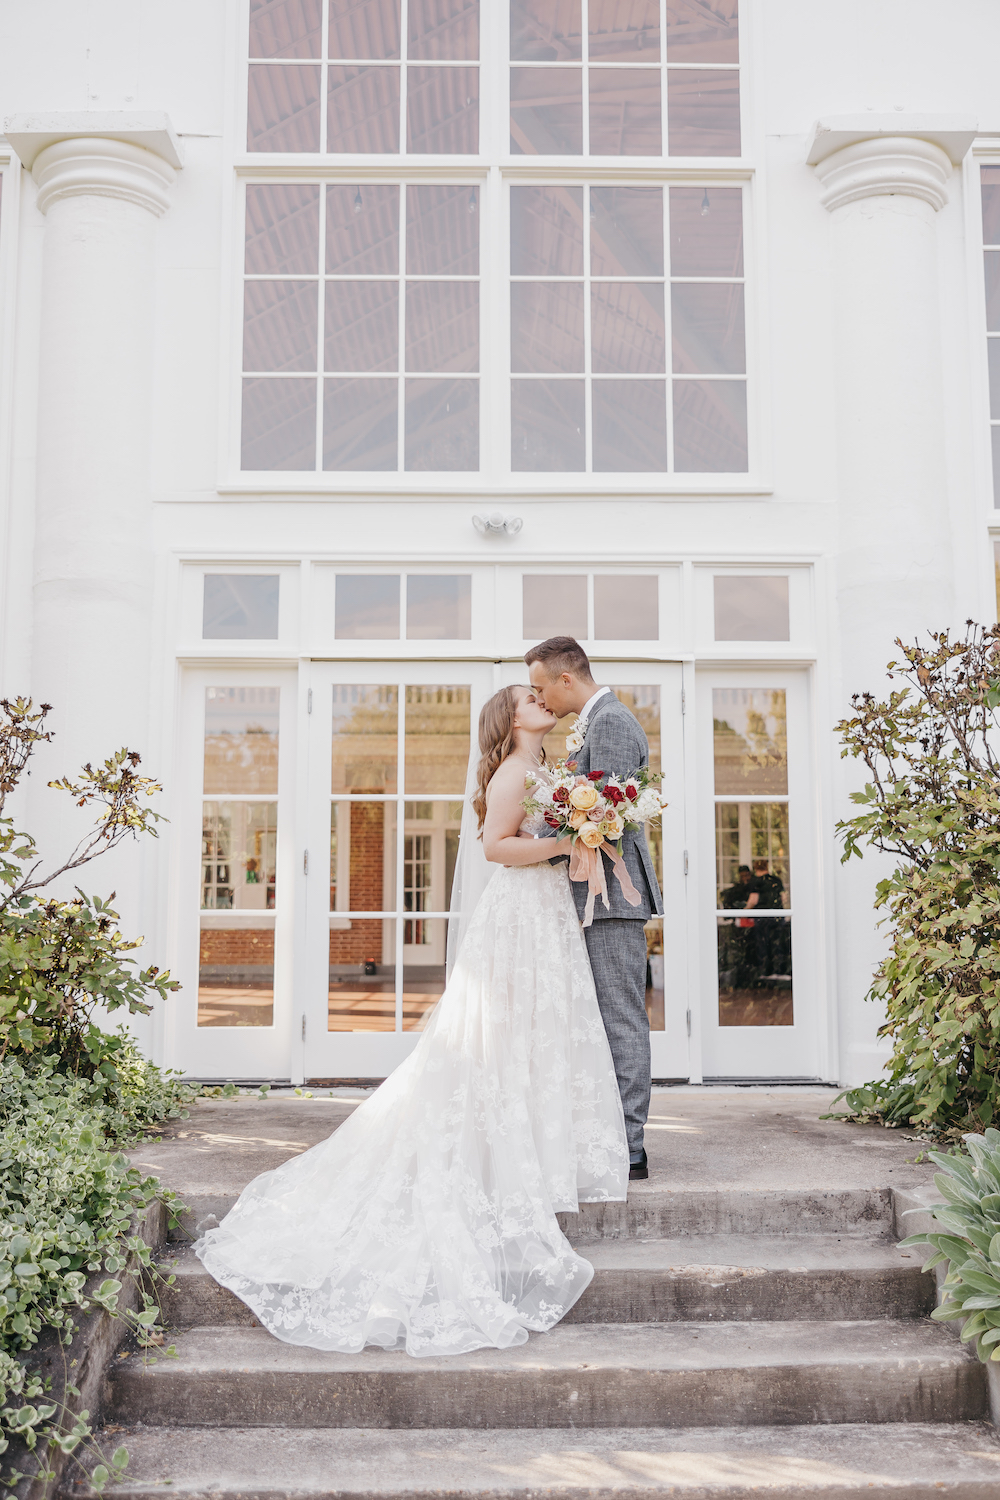 Bride and groom sharing a kiss in front of their wedding venue, captured by Rachel Yearick Photography